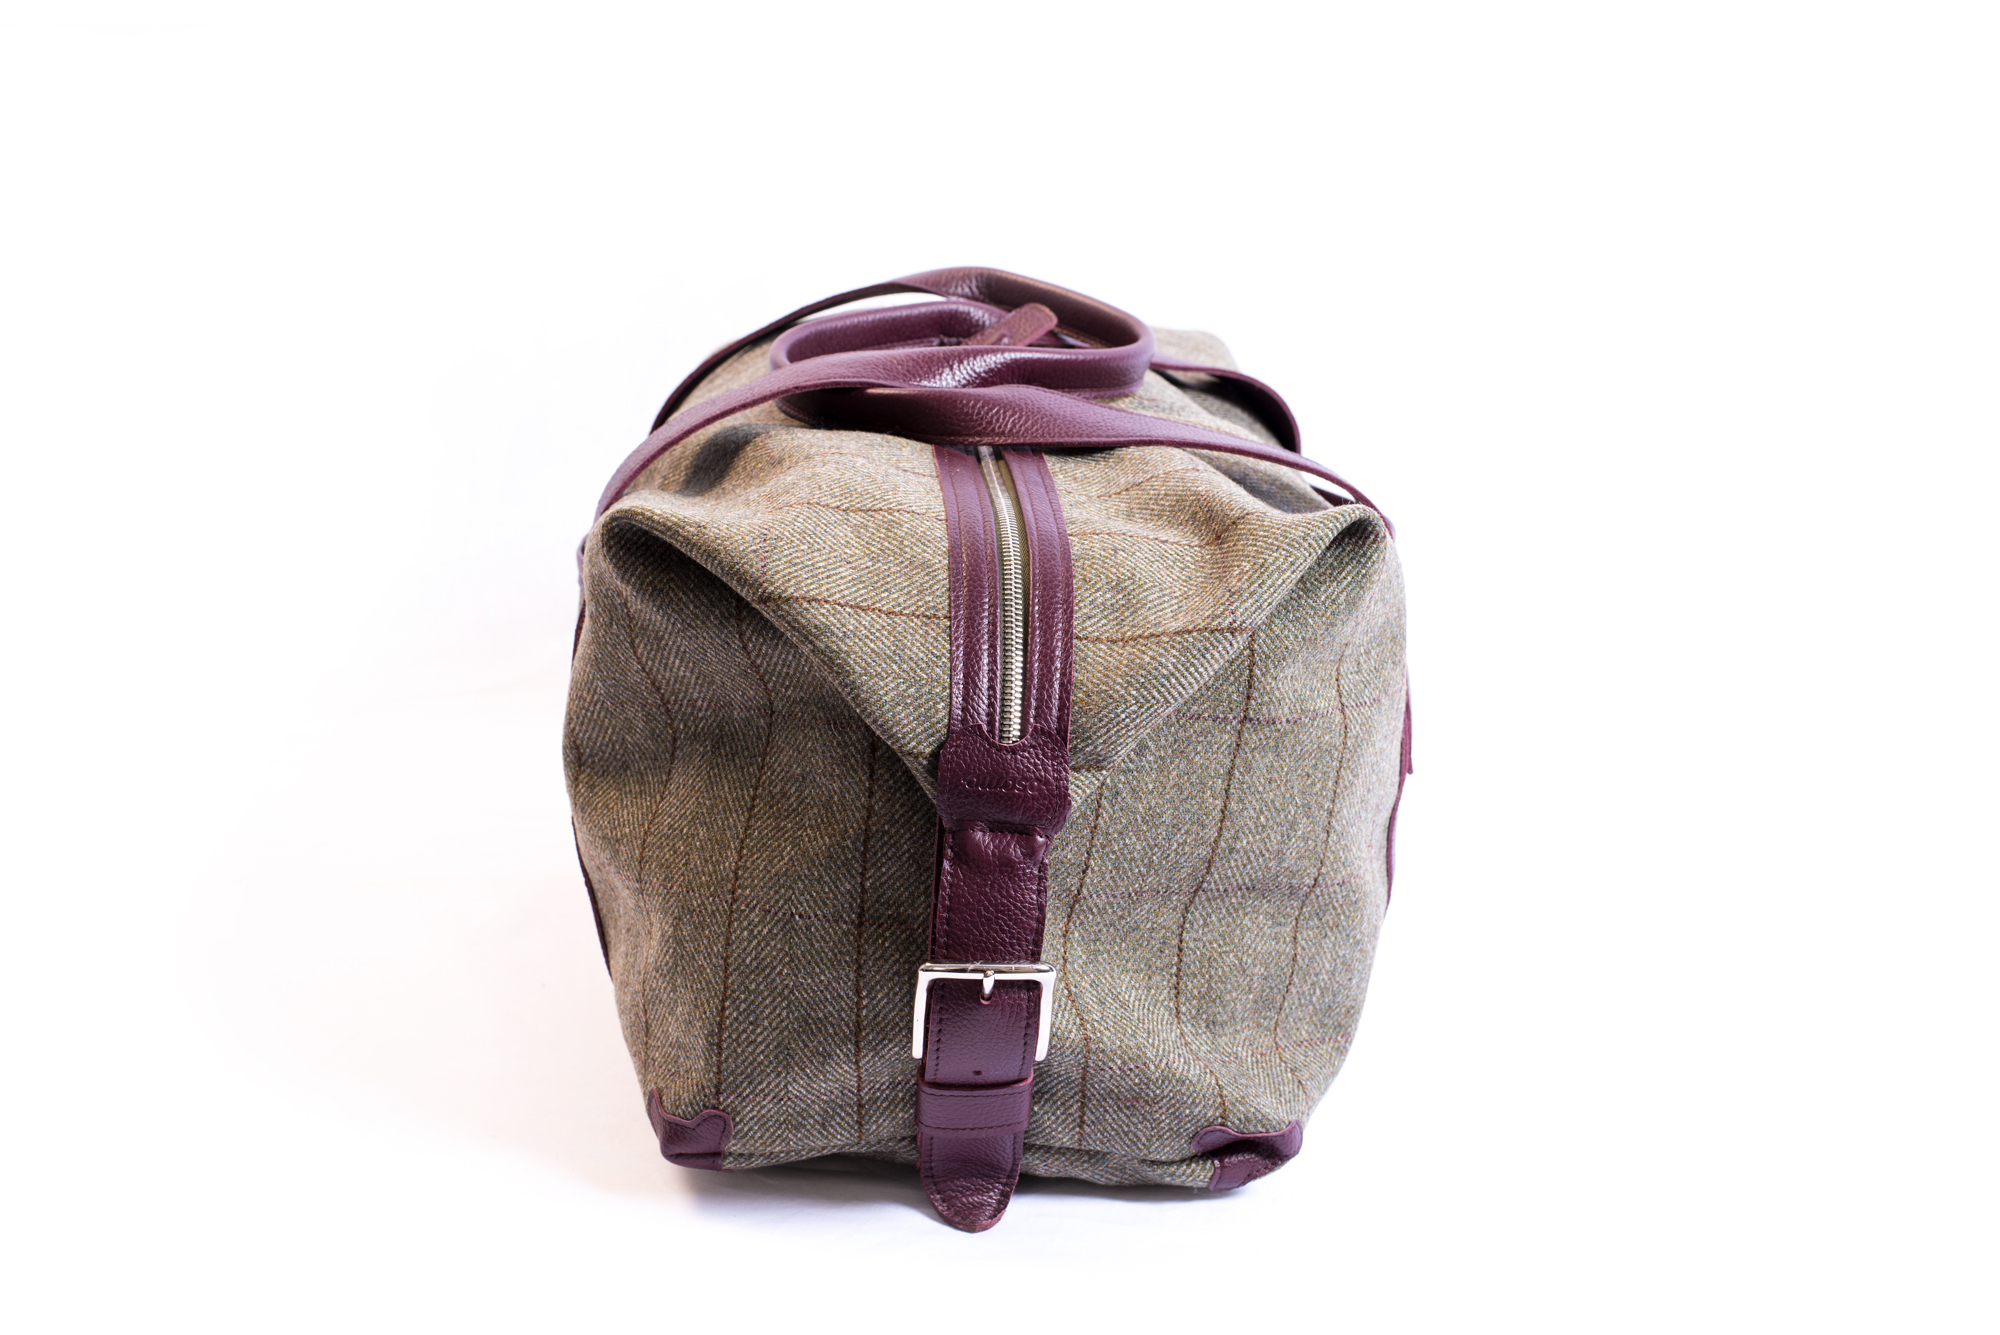 http://www.osomo.ch/projects/bags/campbell02/campbell02_3.jpg